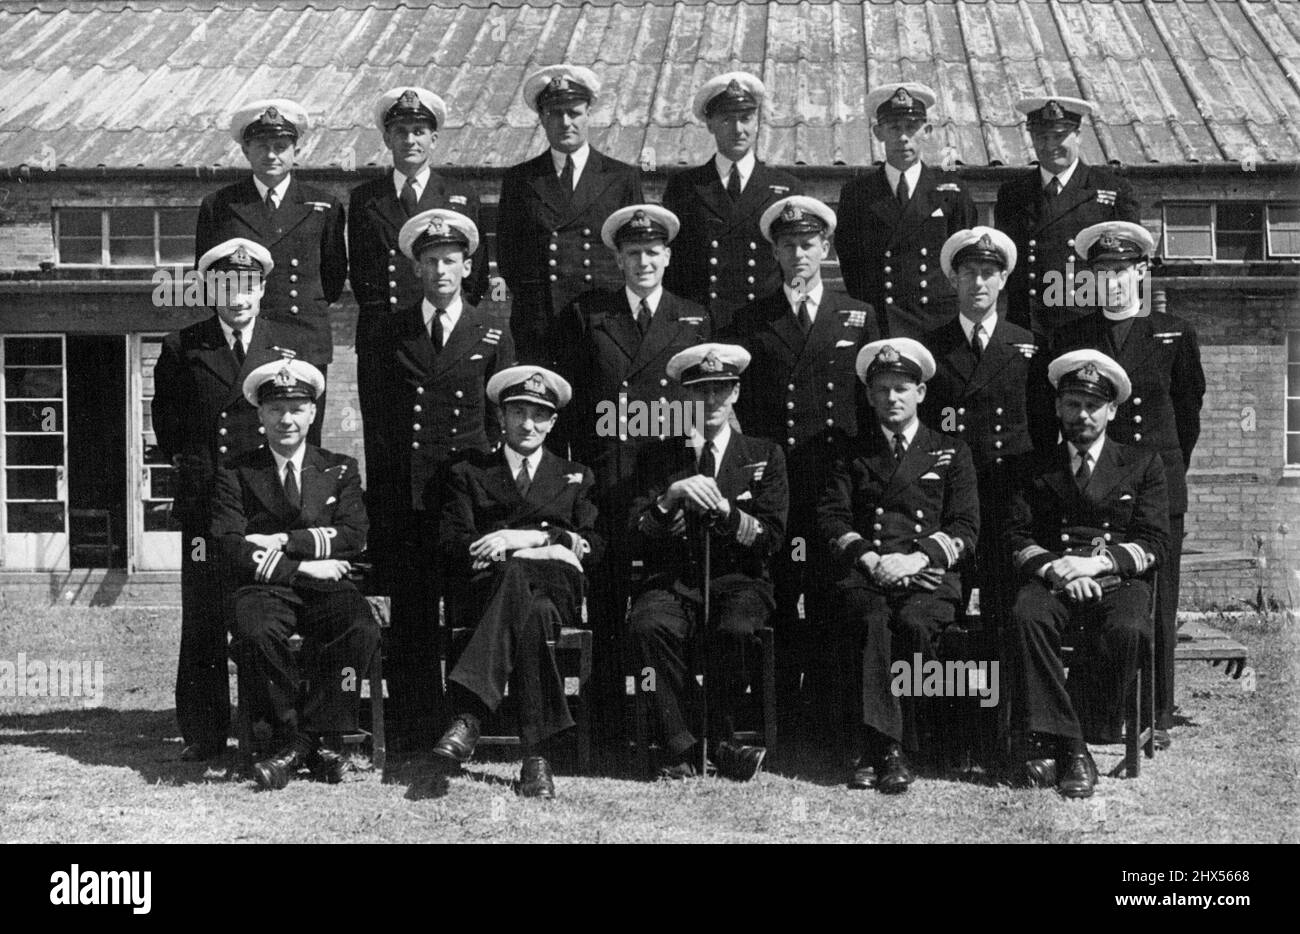 Lt. Mount Batten At P.O.'s School -- Lieut. Philip Mountbatten, R.N., Pictured with fellow officers at the Royal Naval Petty Officers' School, Kingsmoor, Corsham, Wilts.Front Row, left to right: Lieut Cdr. J.C. Ogle, DSC, Cdr. A.D.H.Jay, DSO, DSC & Bar; Captain H.W.Biggs, DSD & Bar, Lt. Cdr. R.G. Jennins, OBE, DSC, Lieut. Cdr. P.J.Hoare.Second Row, Left to right; Lt. Cdr. P.R.G.Worth, DSC, Lt.Cdr.W.D.O'Brien, DSC, Inst.Lt .K.R.G. Suckling, LT. Philip Mountbatten, Lt. E.G.Mason, Rev. B.N. Kennedy.Third Row, left to right: Lt. (E) A.L. Green, Mr. A.G.Samuel, (Cd.Gnr), Mr.E. Wheldrake (Cd.Bosun), Stock Photo